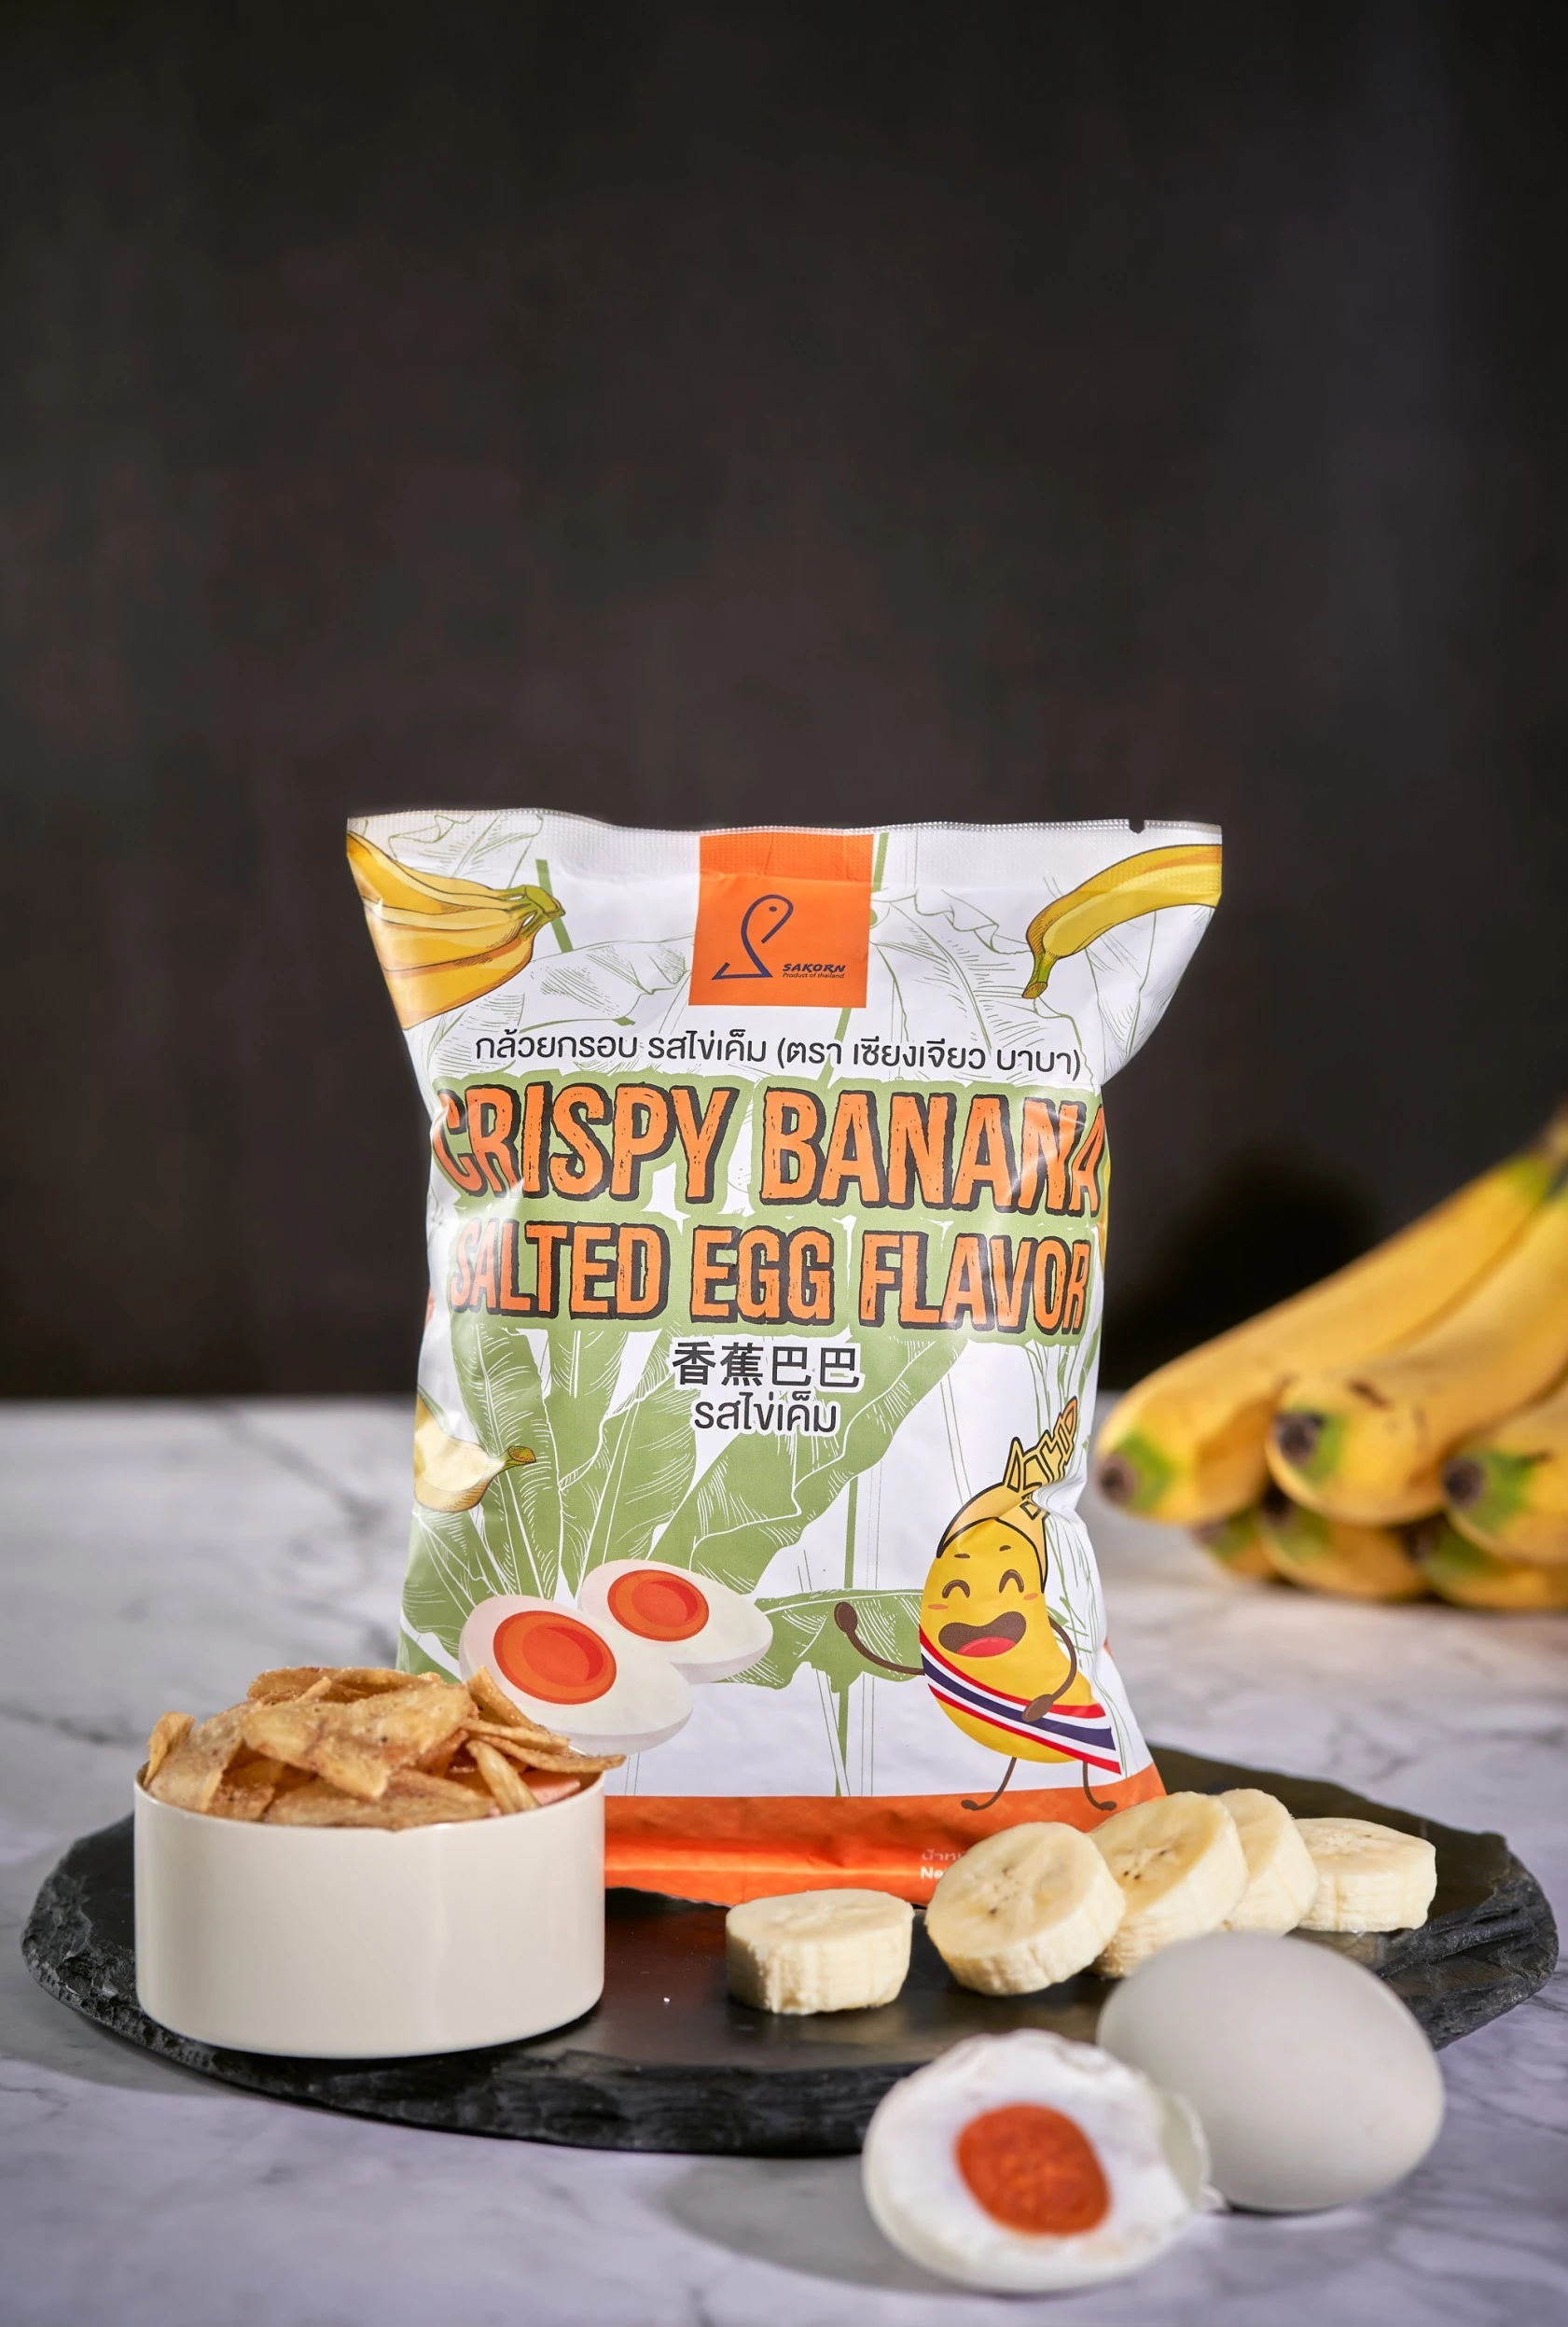 Premium Quality Crispy Banana Chip Salted Egg Flavor Fruit Snack from Thailand